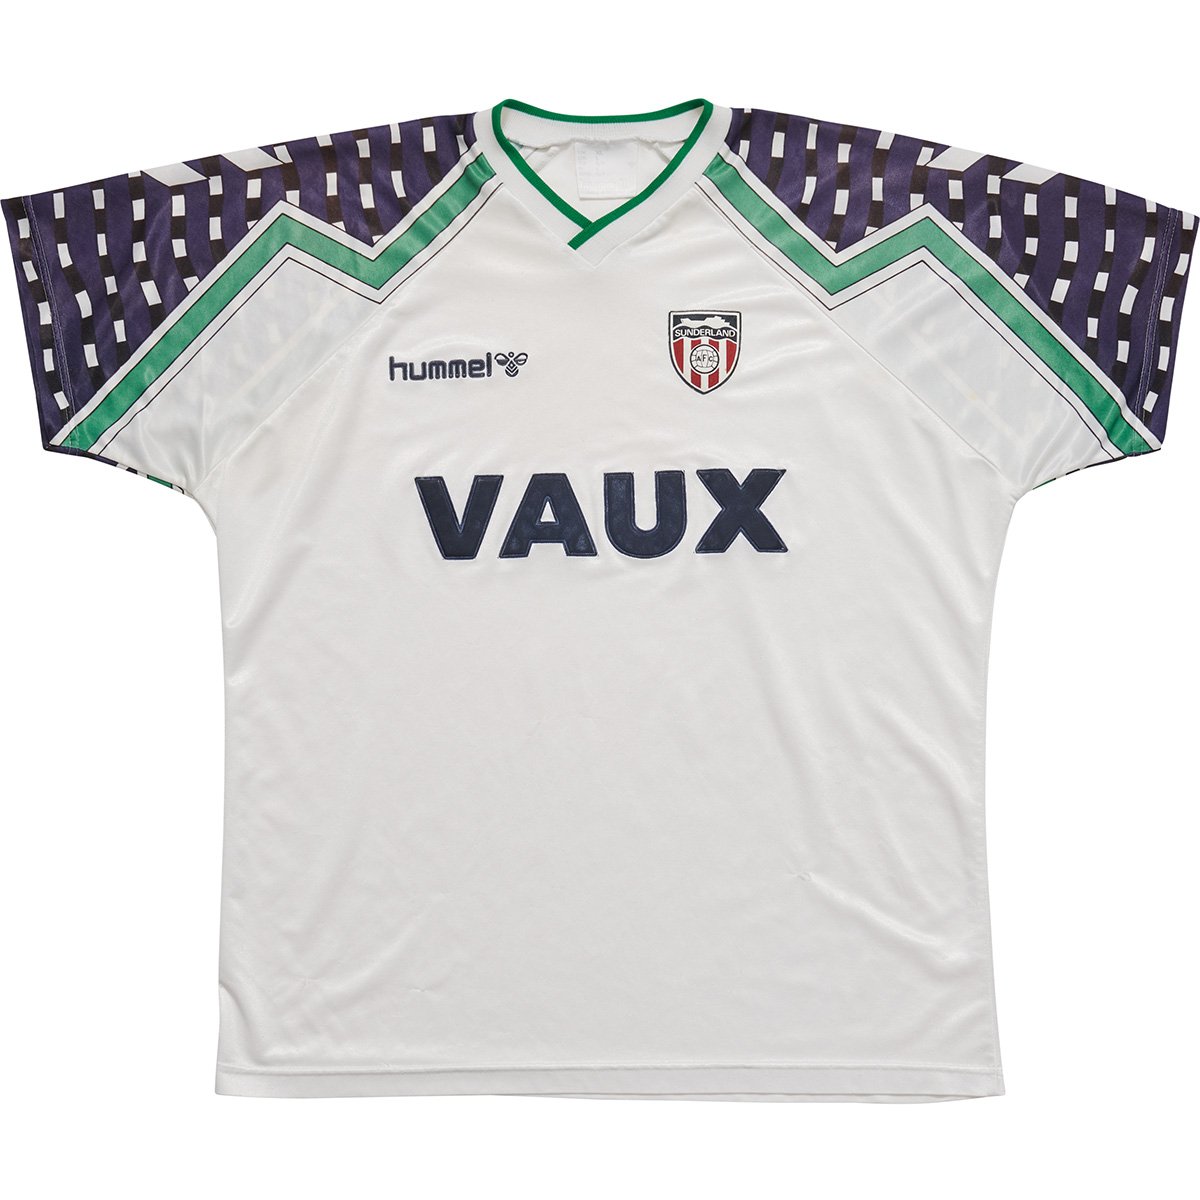 Wanting your hands on one of the @vauxbrewery / @hummel1923 #SAFC away shirts? Head over to @KitbagUK NOW and pick one up for just £27... - kitbag.evyy.net/OrARbA